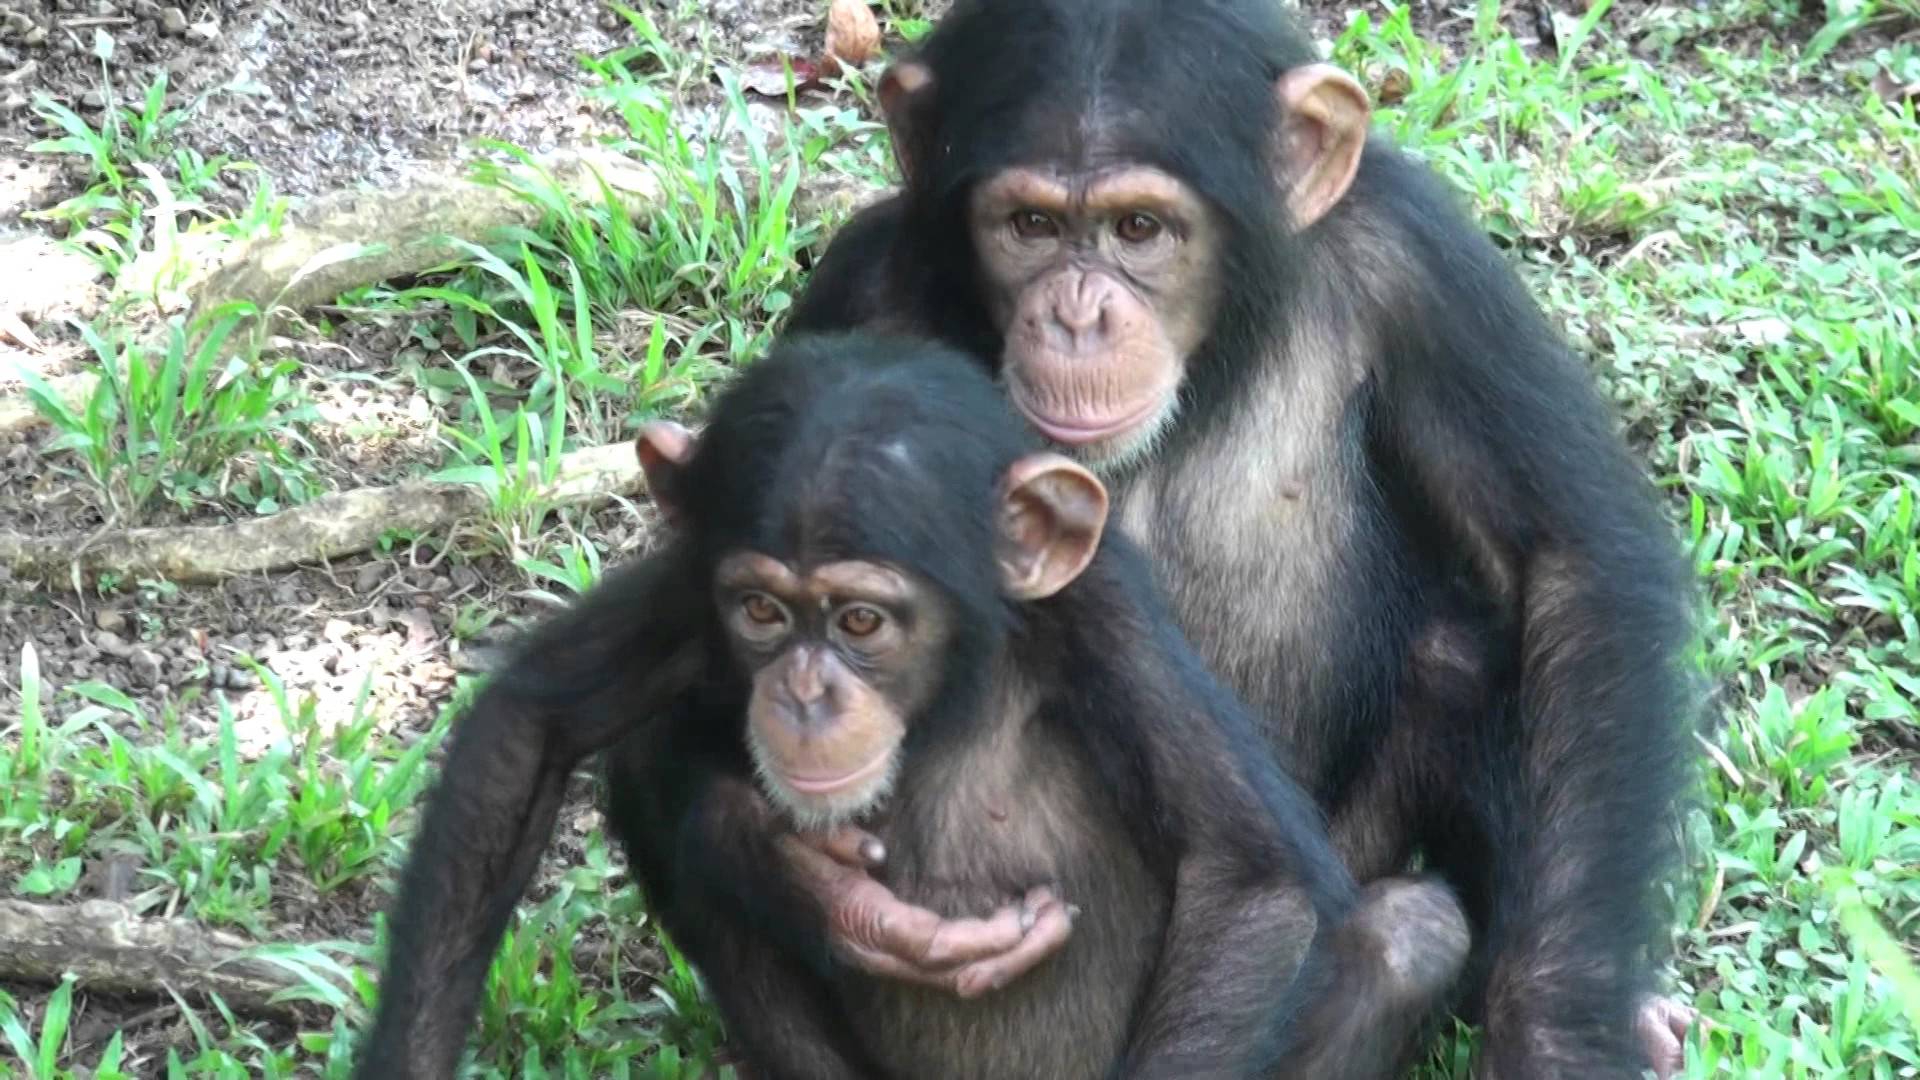 Baby Chimps in Love